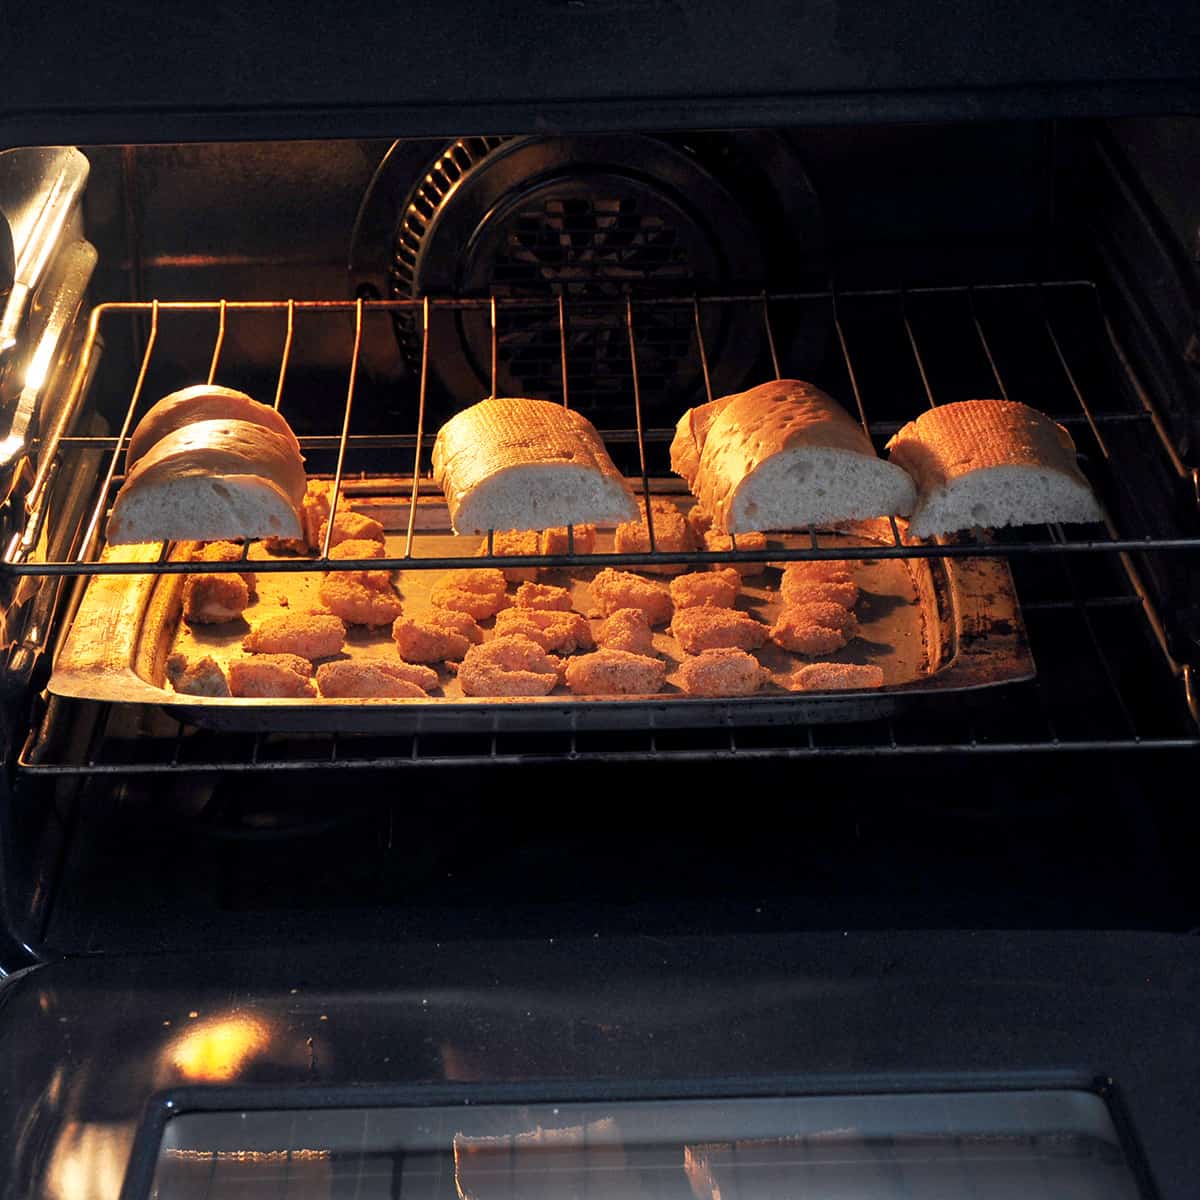 shrimp and french bread in oven baking